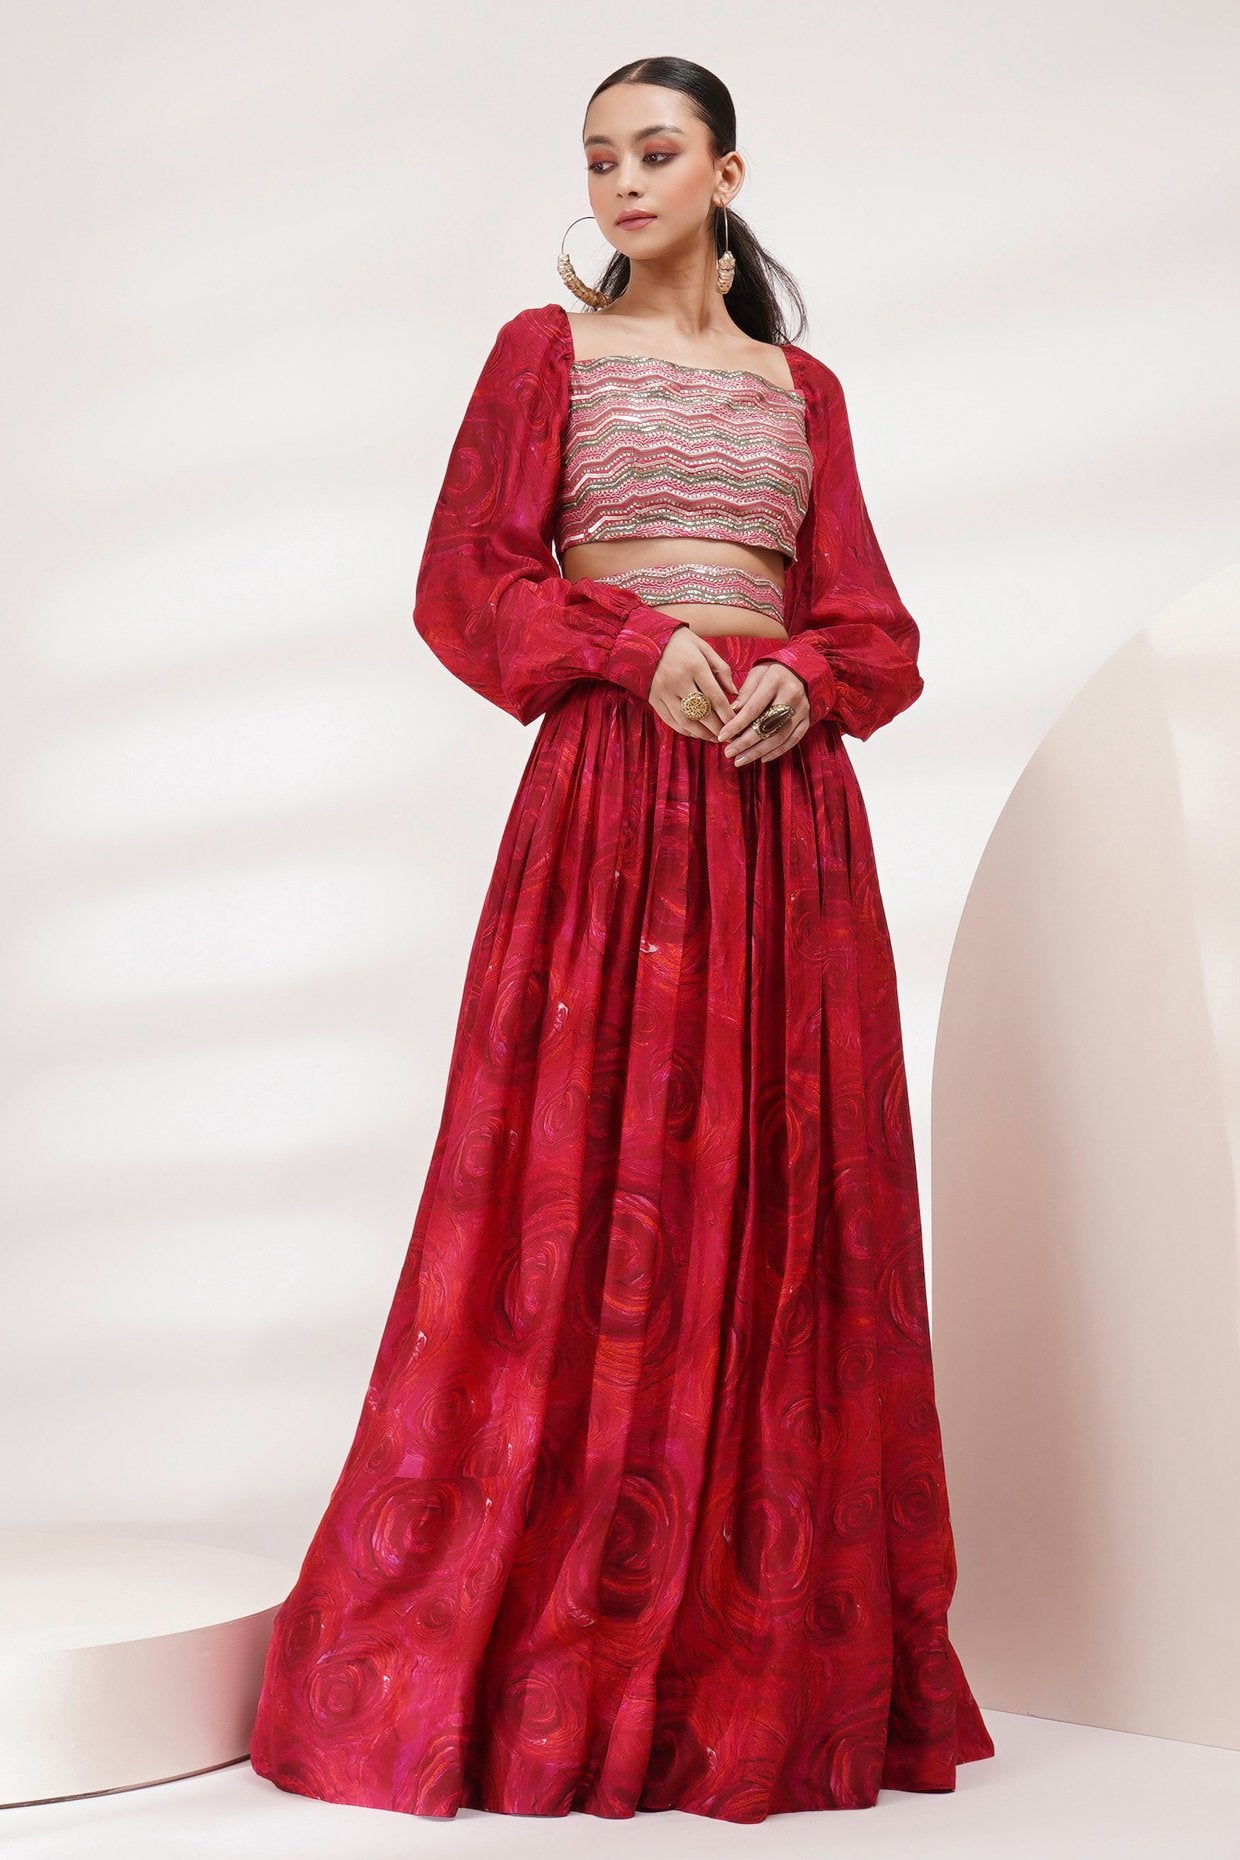 Regal Red Chandelier Drop Lehenga Set With Full Sleeves Blouse - Vvani by  Vani Vats- Fabilicious Fashion